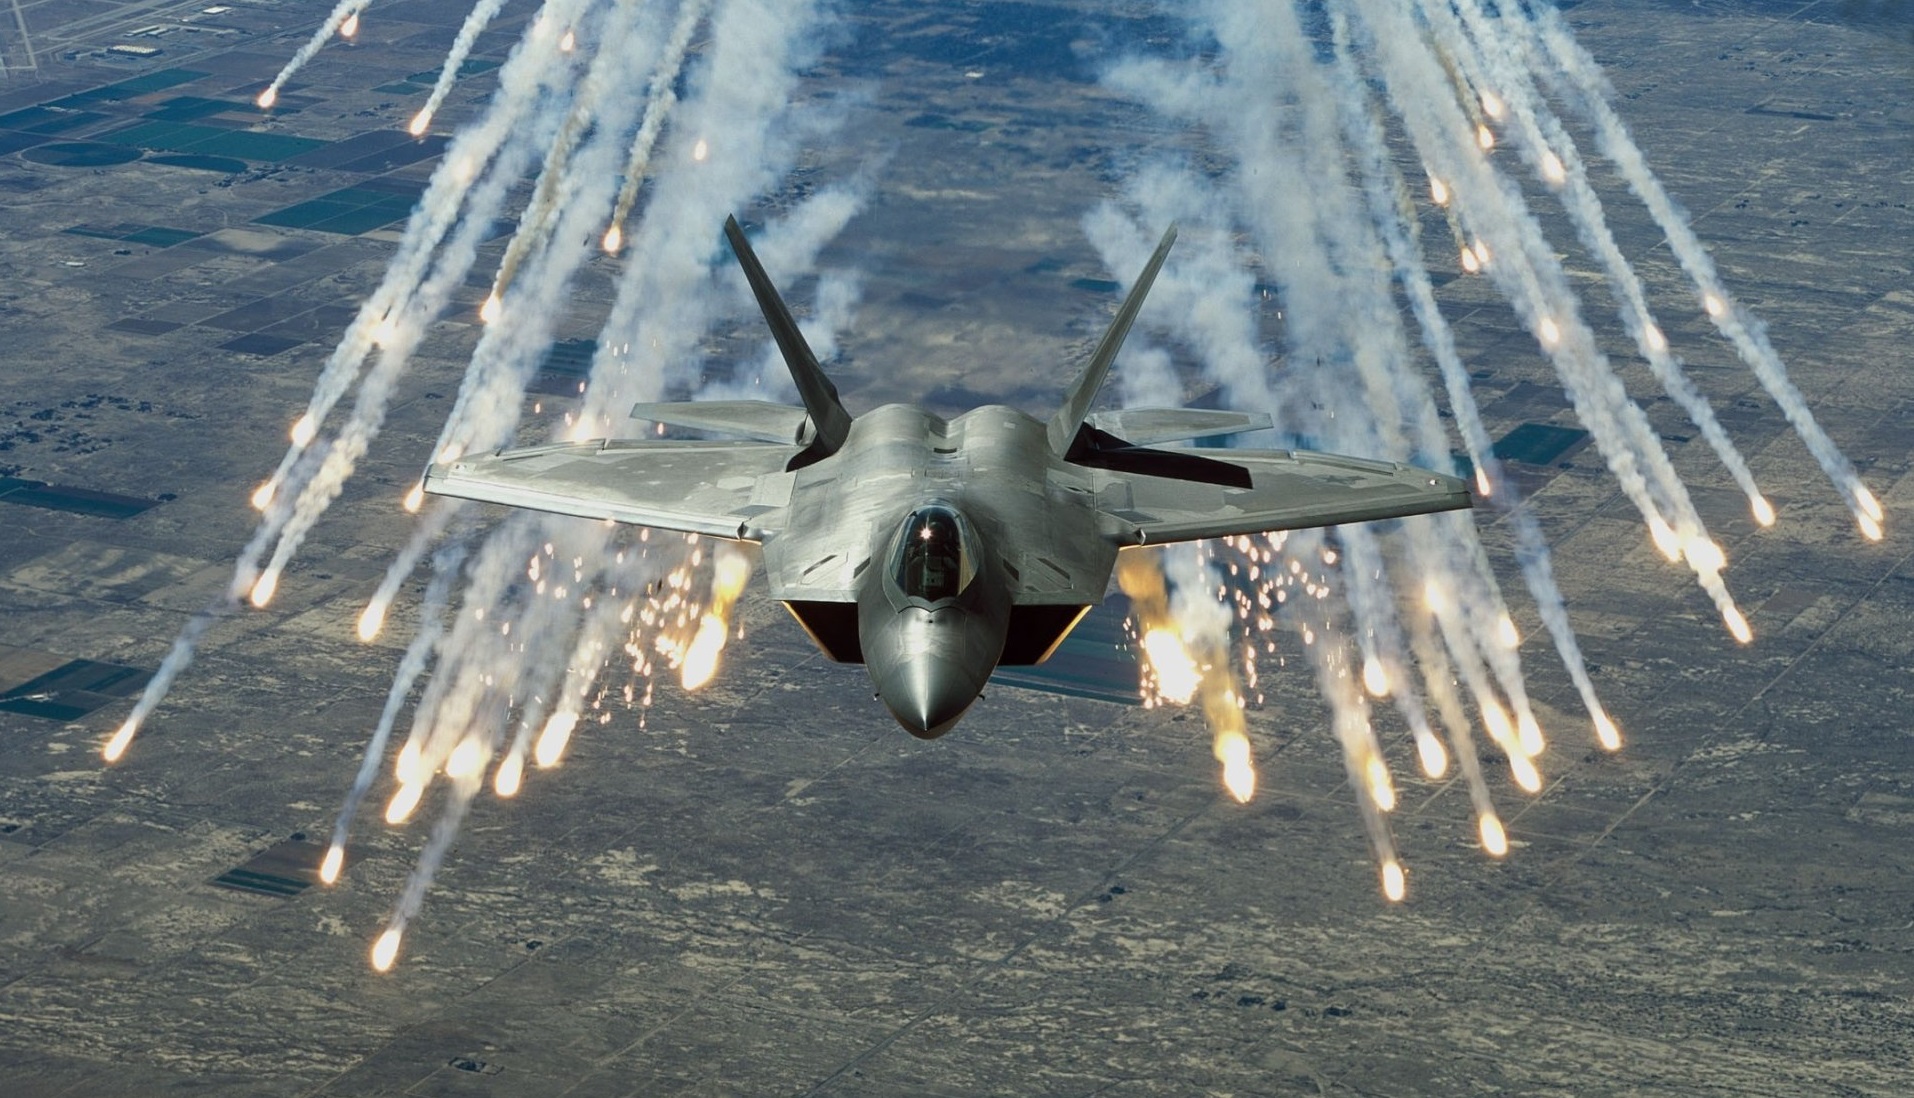 The U.S. wants to decommission the F-22 Raptor to free up budget for a next-generation fighter that will cost hundreds of millions of dollars